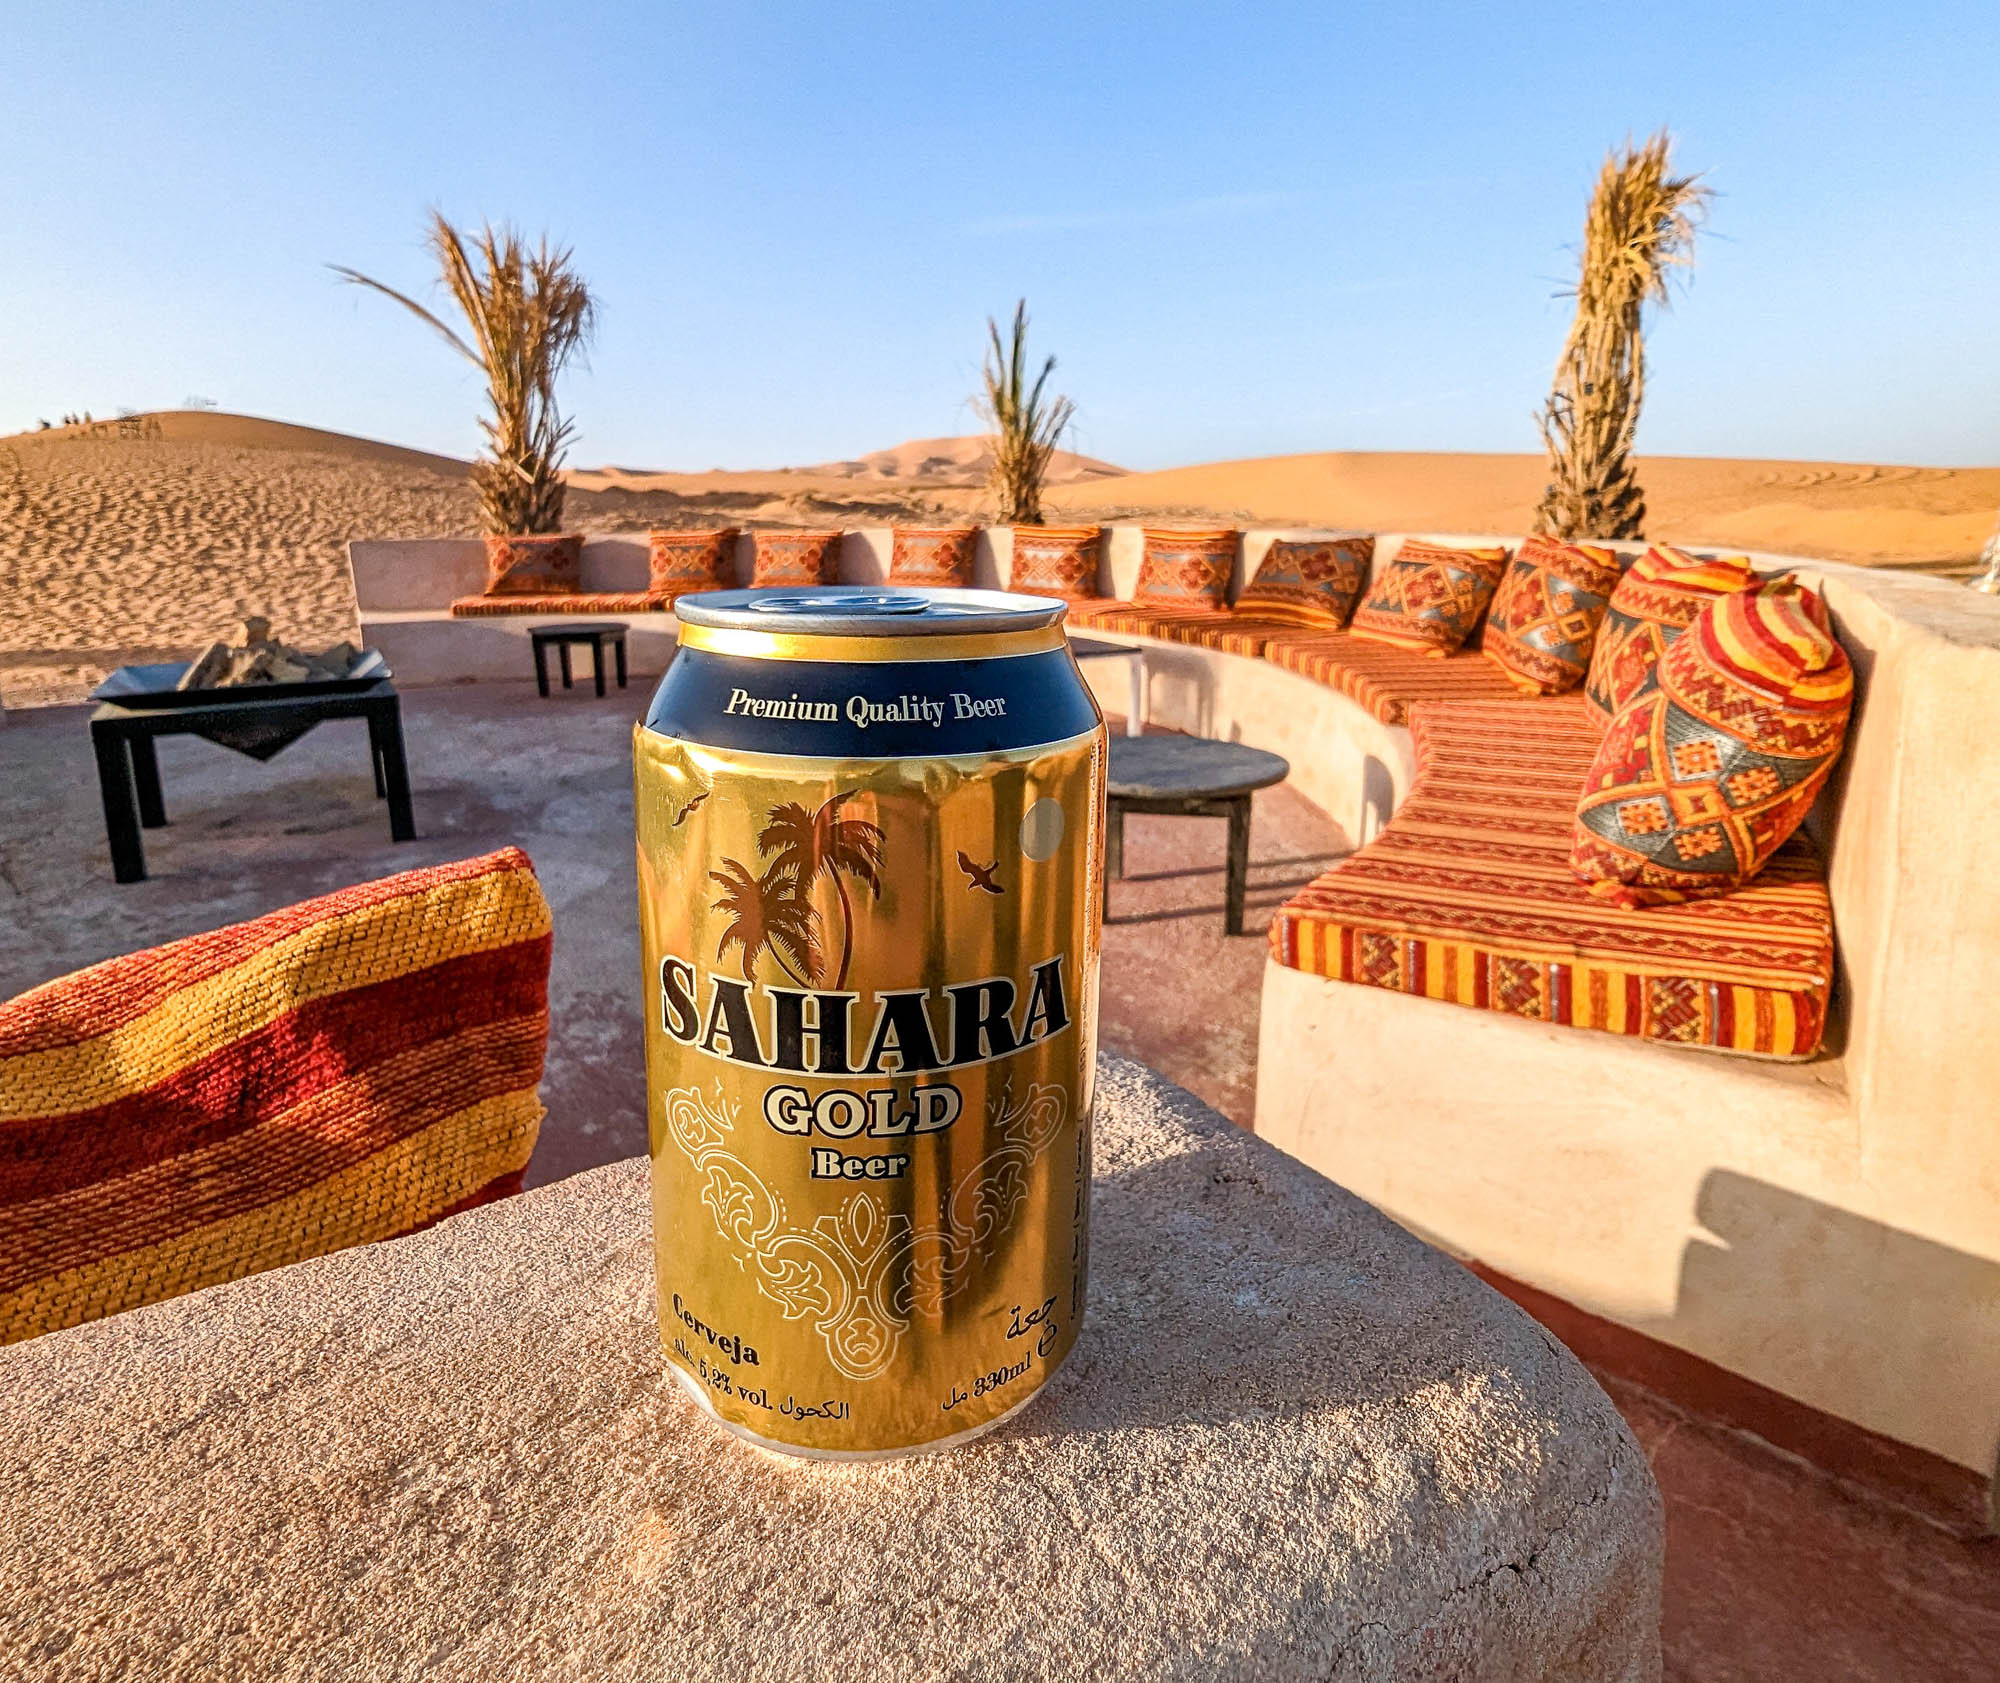 Alcohol in Morocco: 14 Important Things You Need to Know Before You Go